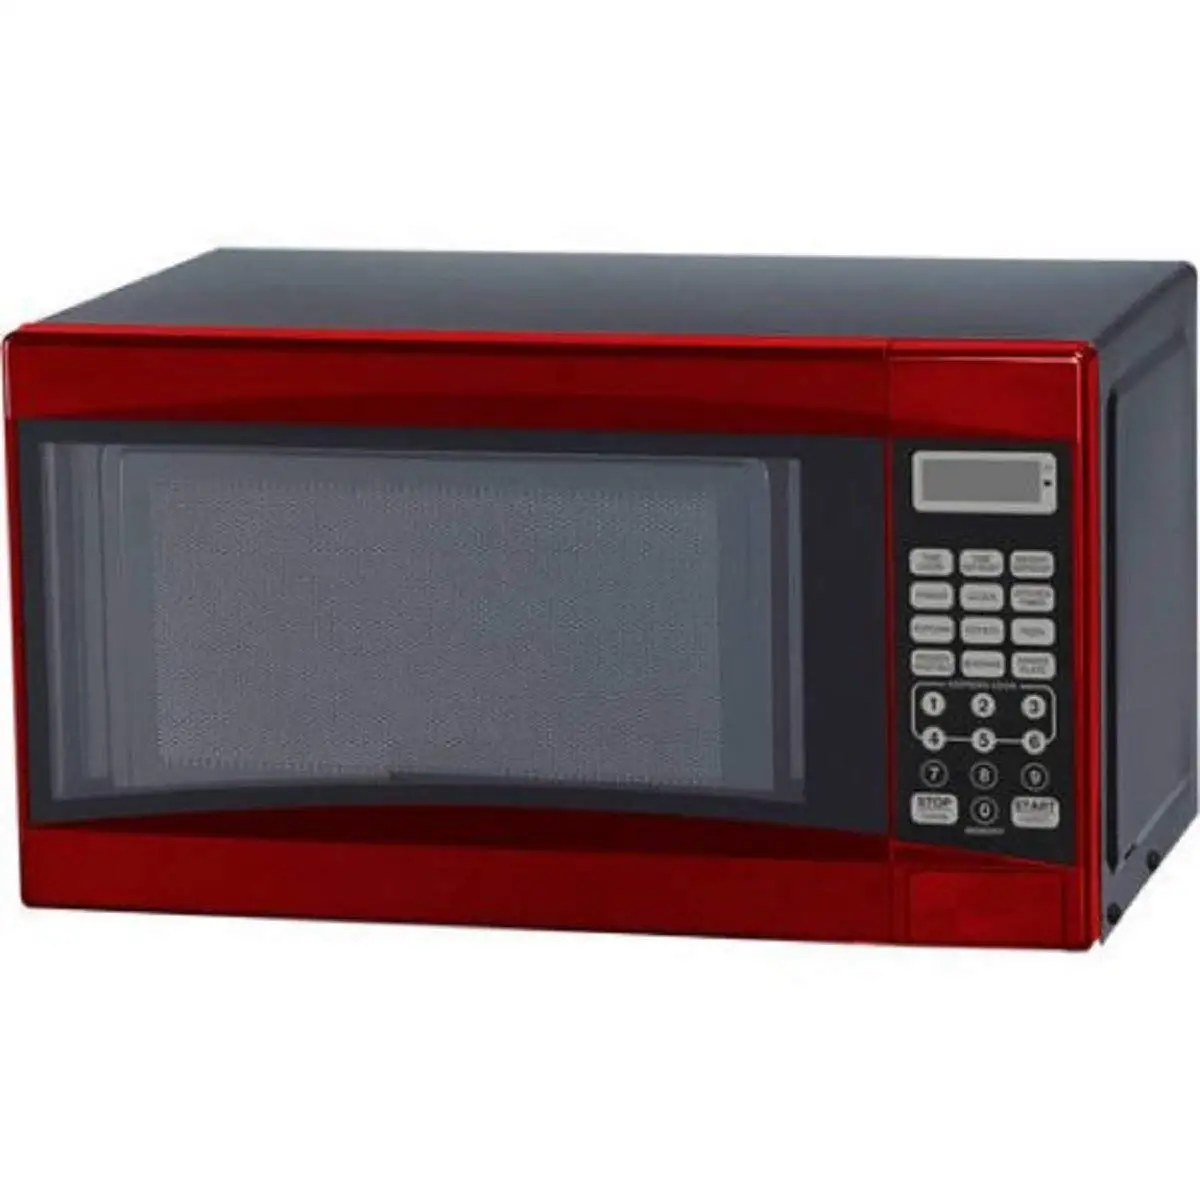 Cheap Microwave Child Lock, find Microwave Child Lock deals on line at